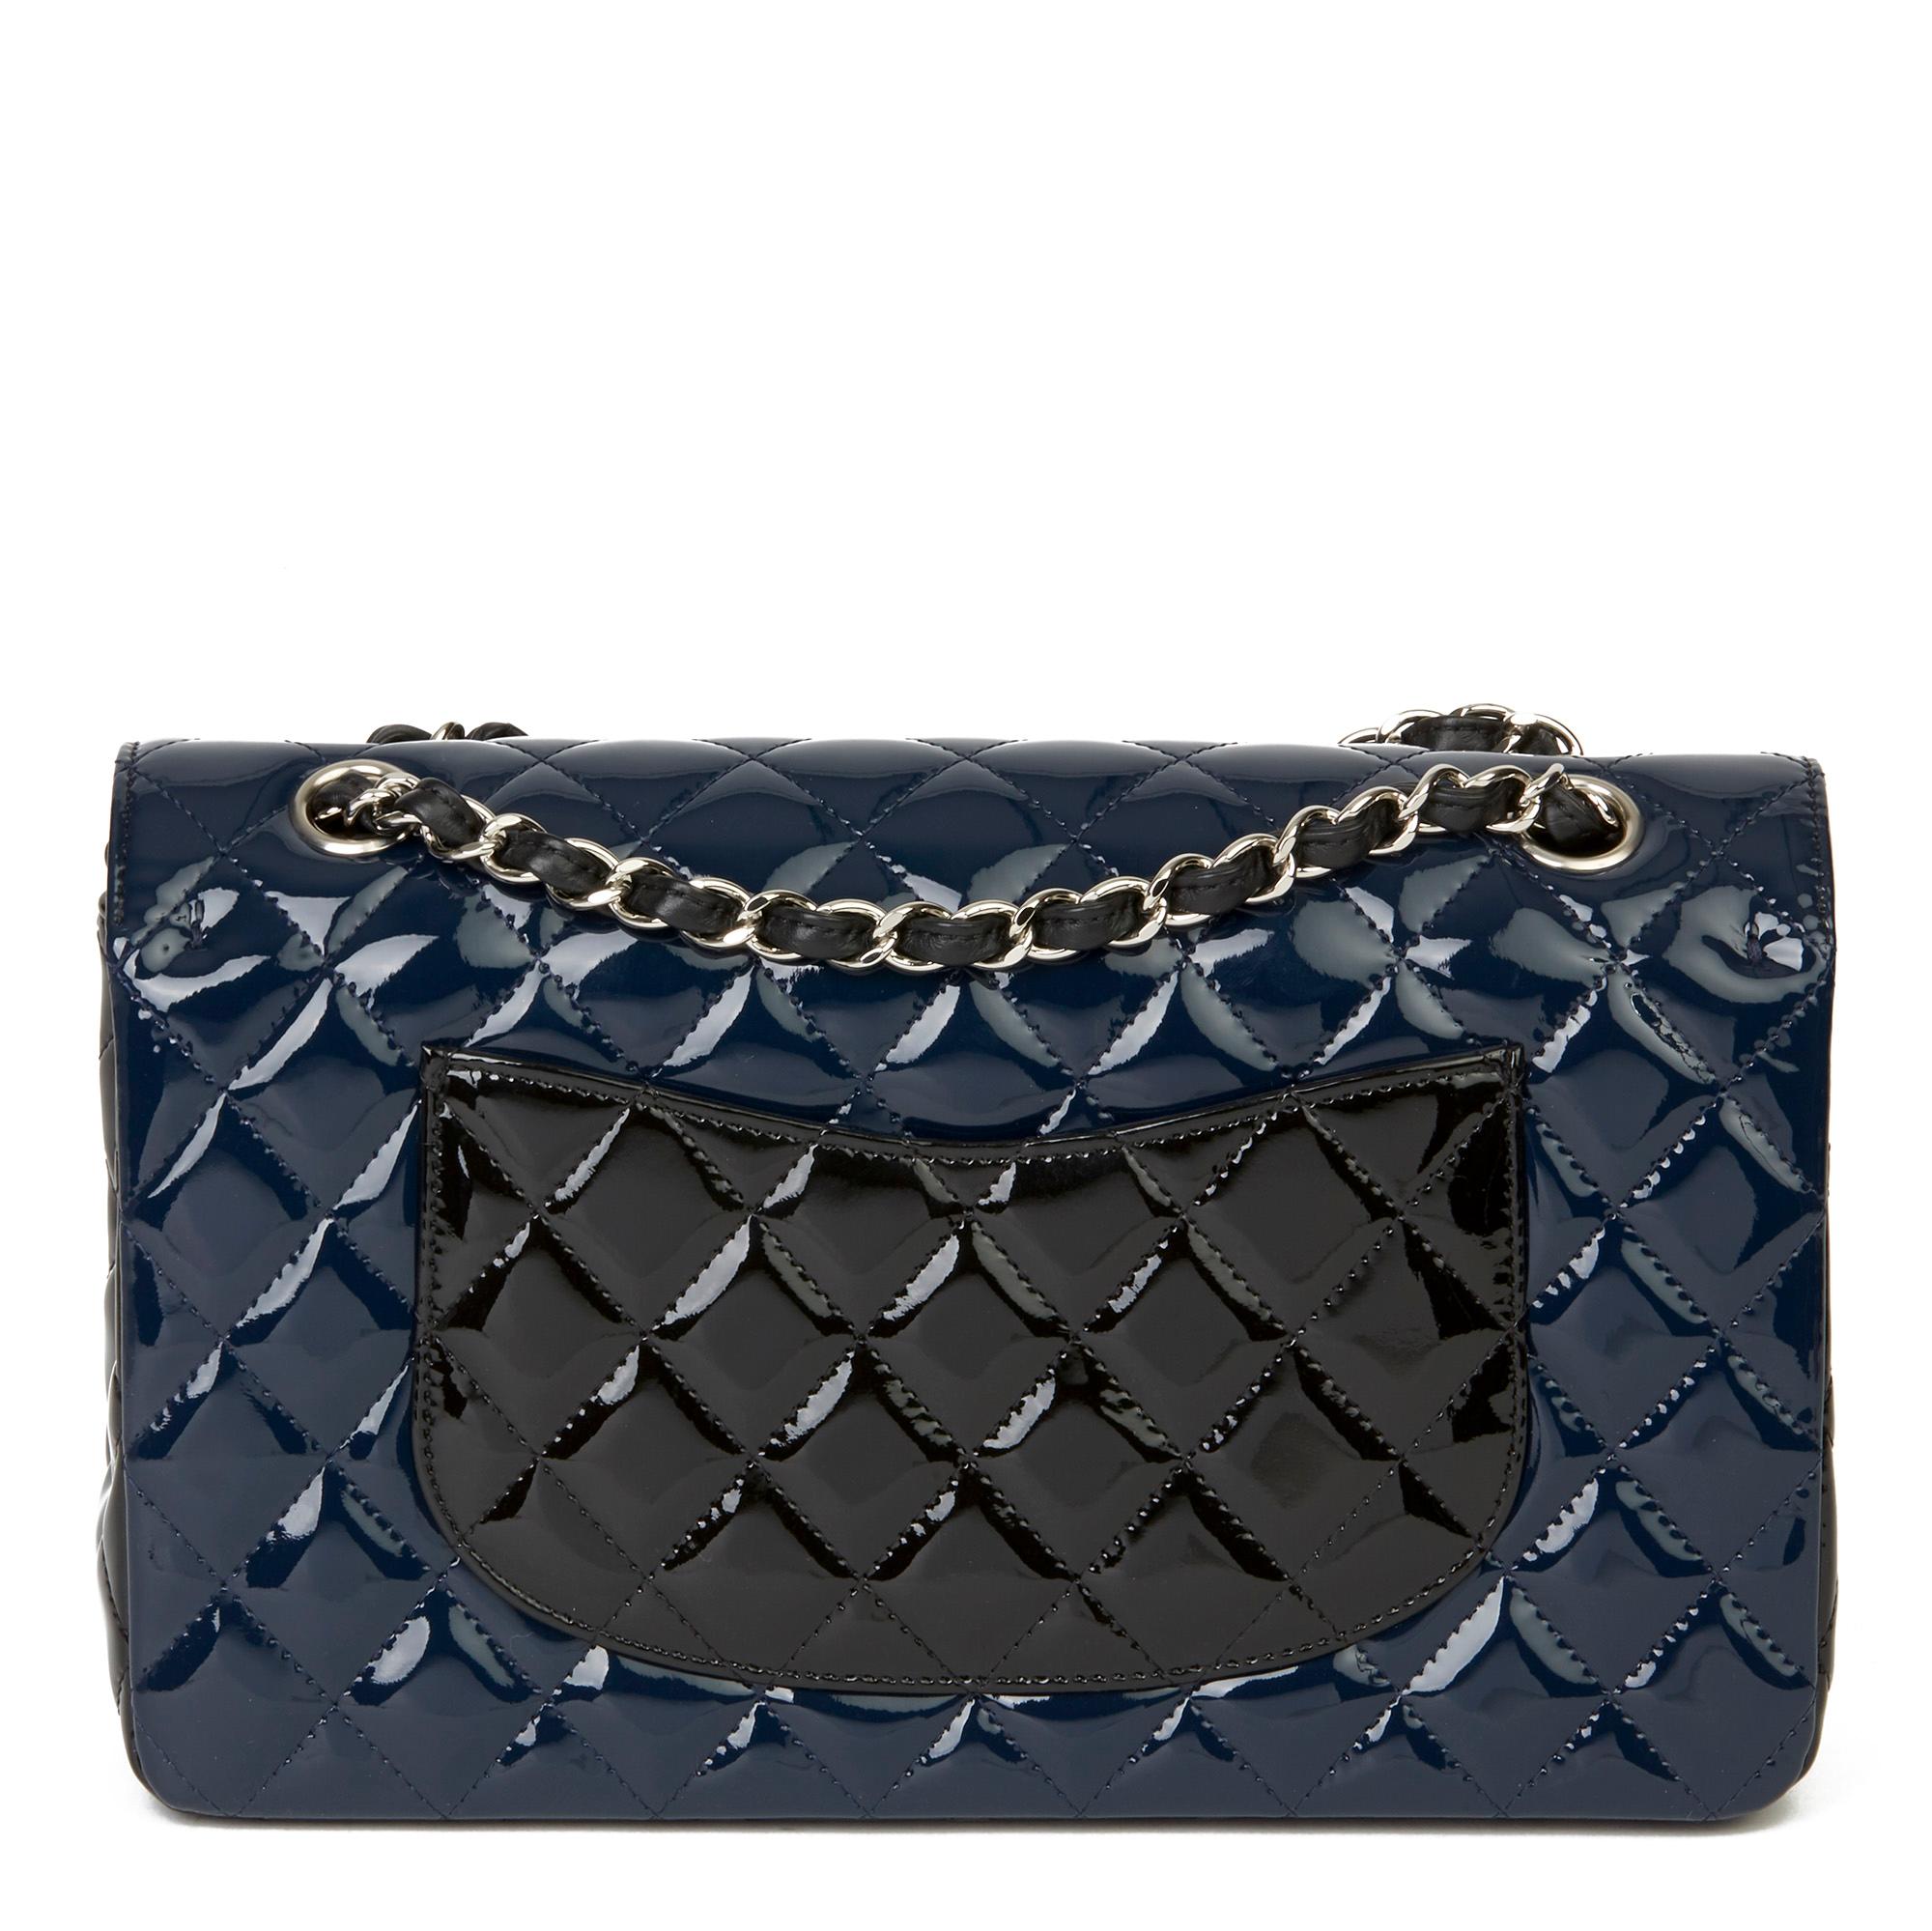 2020 Chanel Black & Navy Quilted Patent Leather Medium Classic Double Flap Bag 1